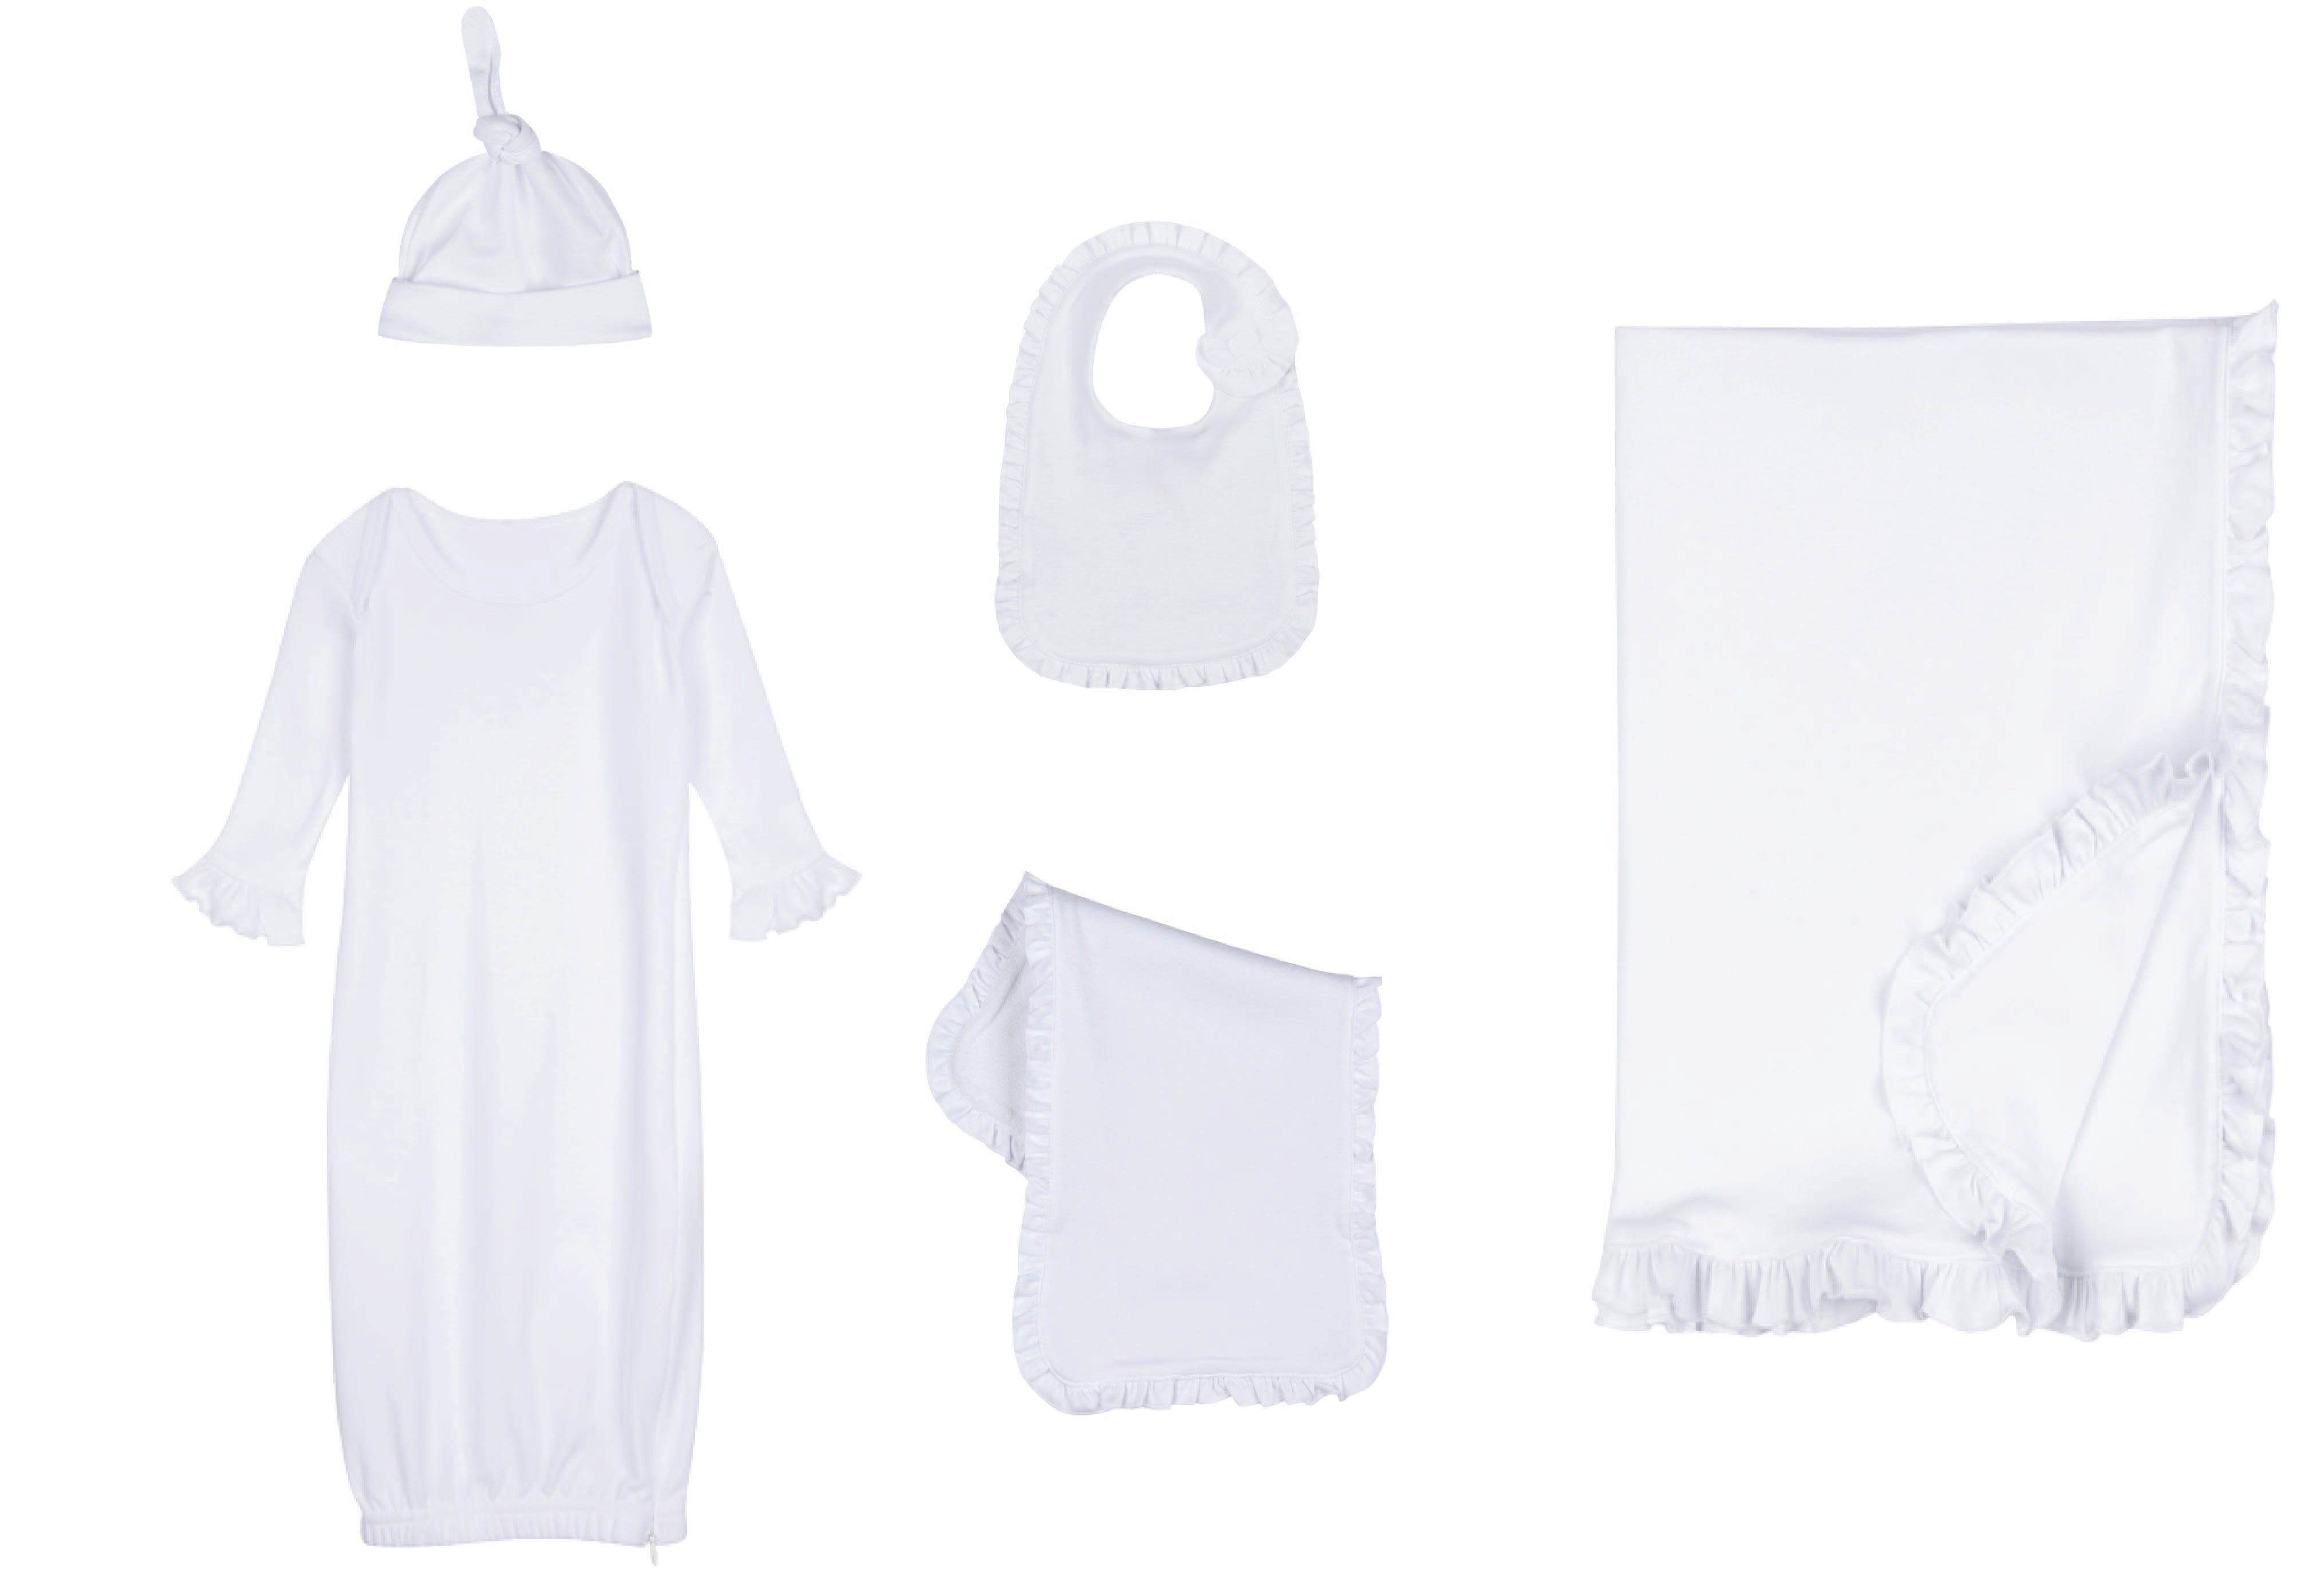 Embroidery Blank Set with Ruffle Trim, White Color